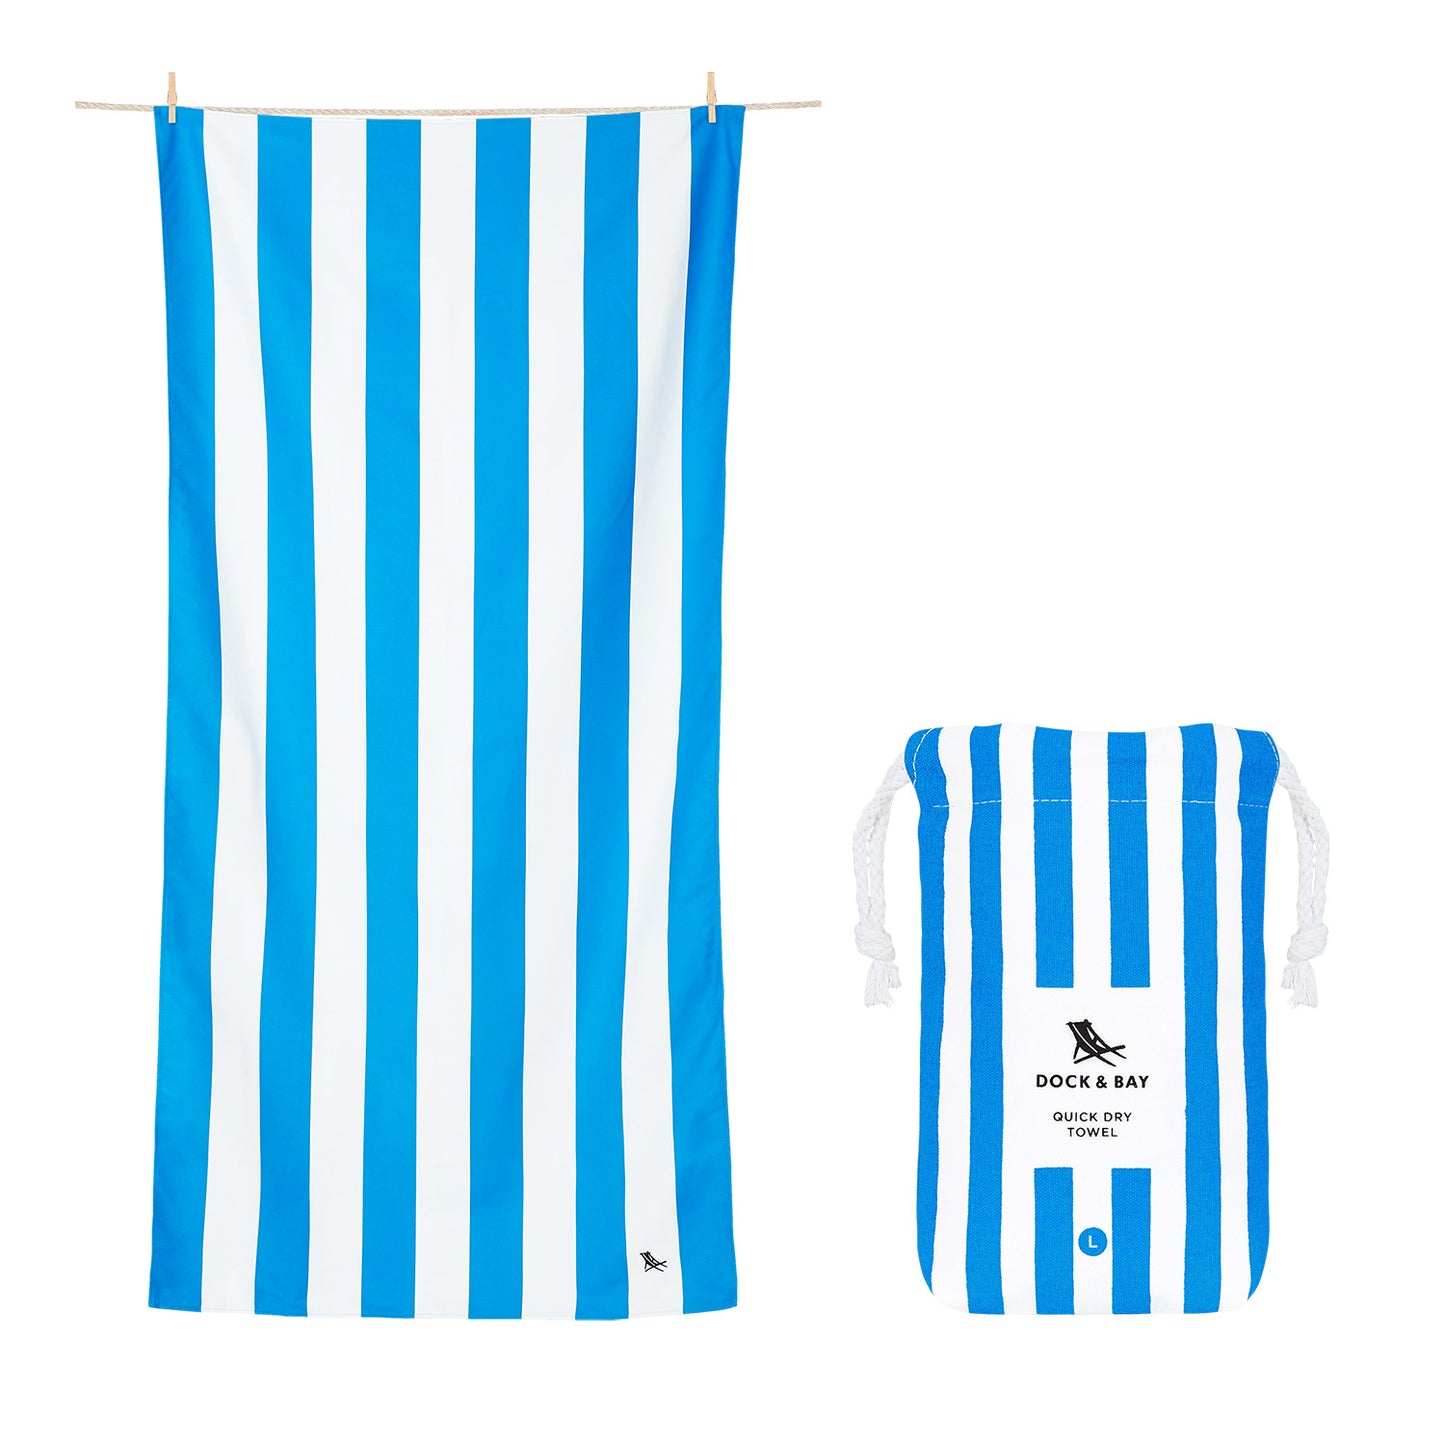 Dock and Bay Quick Dry Beach Towel- Bondi Blue from Home and Bay